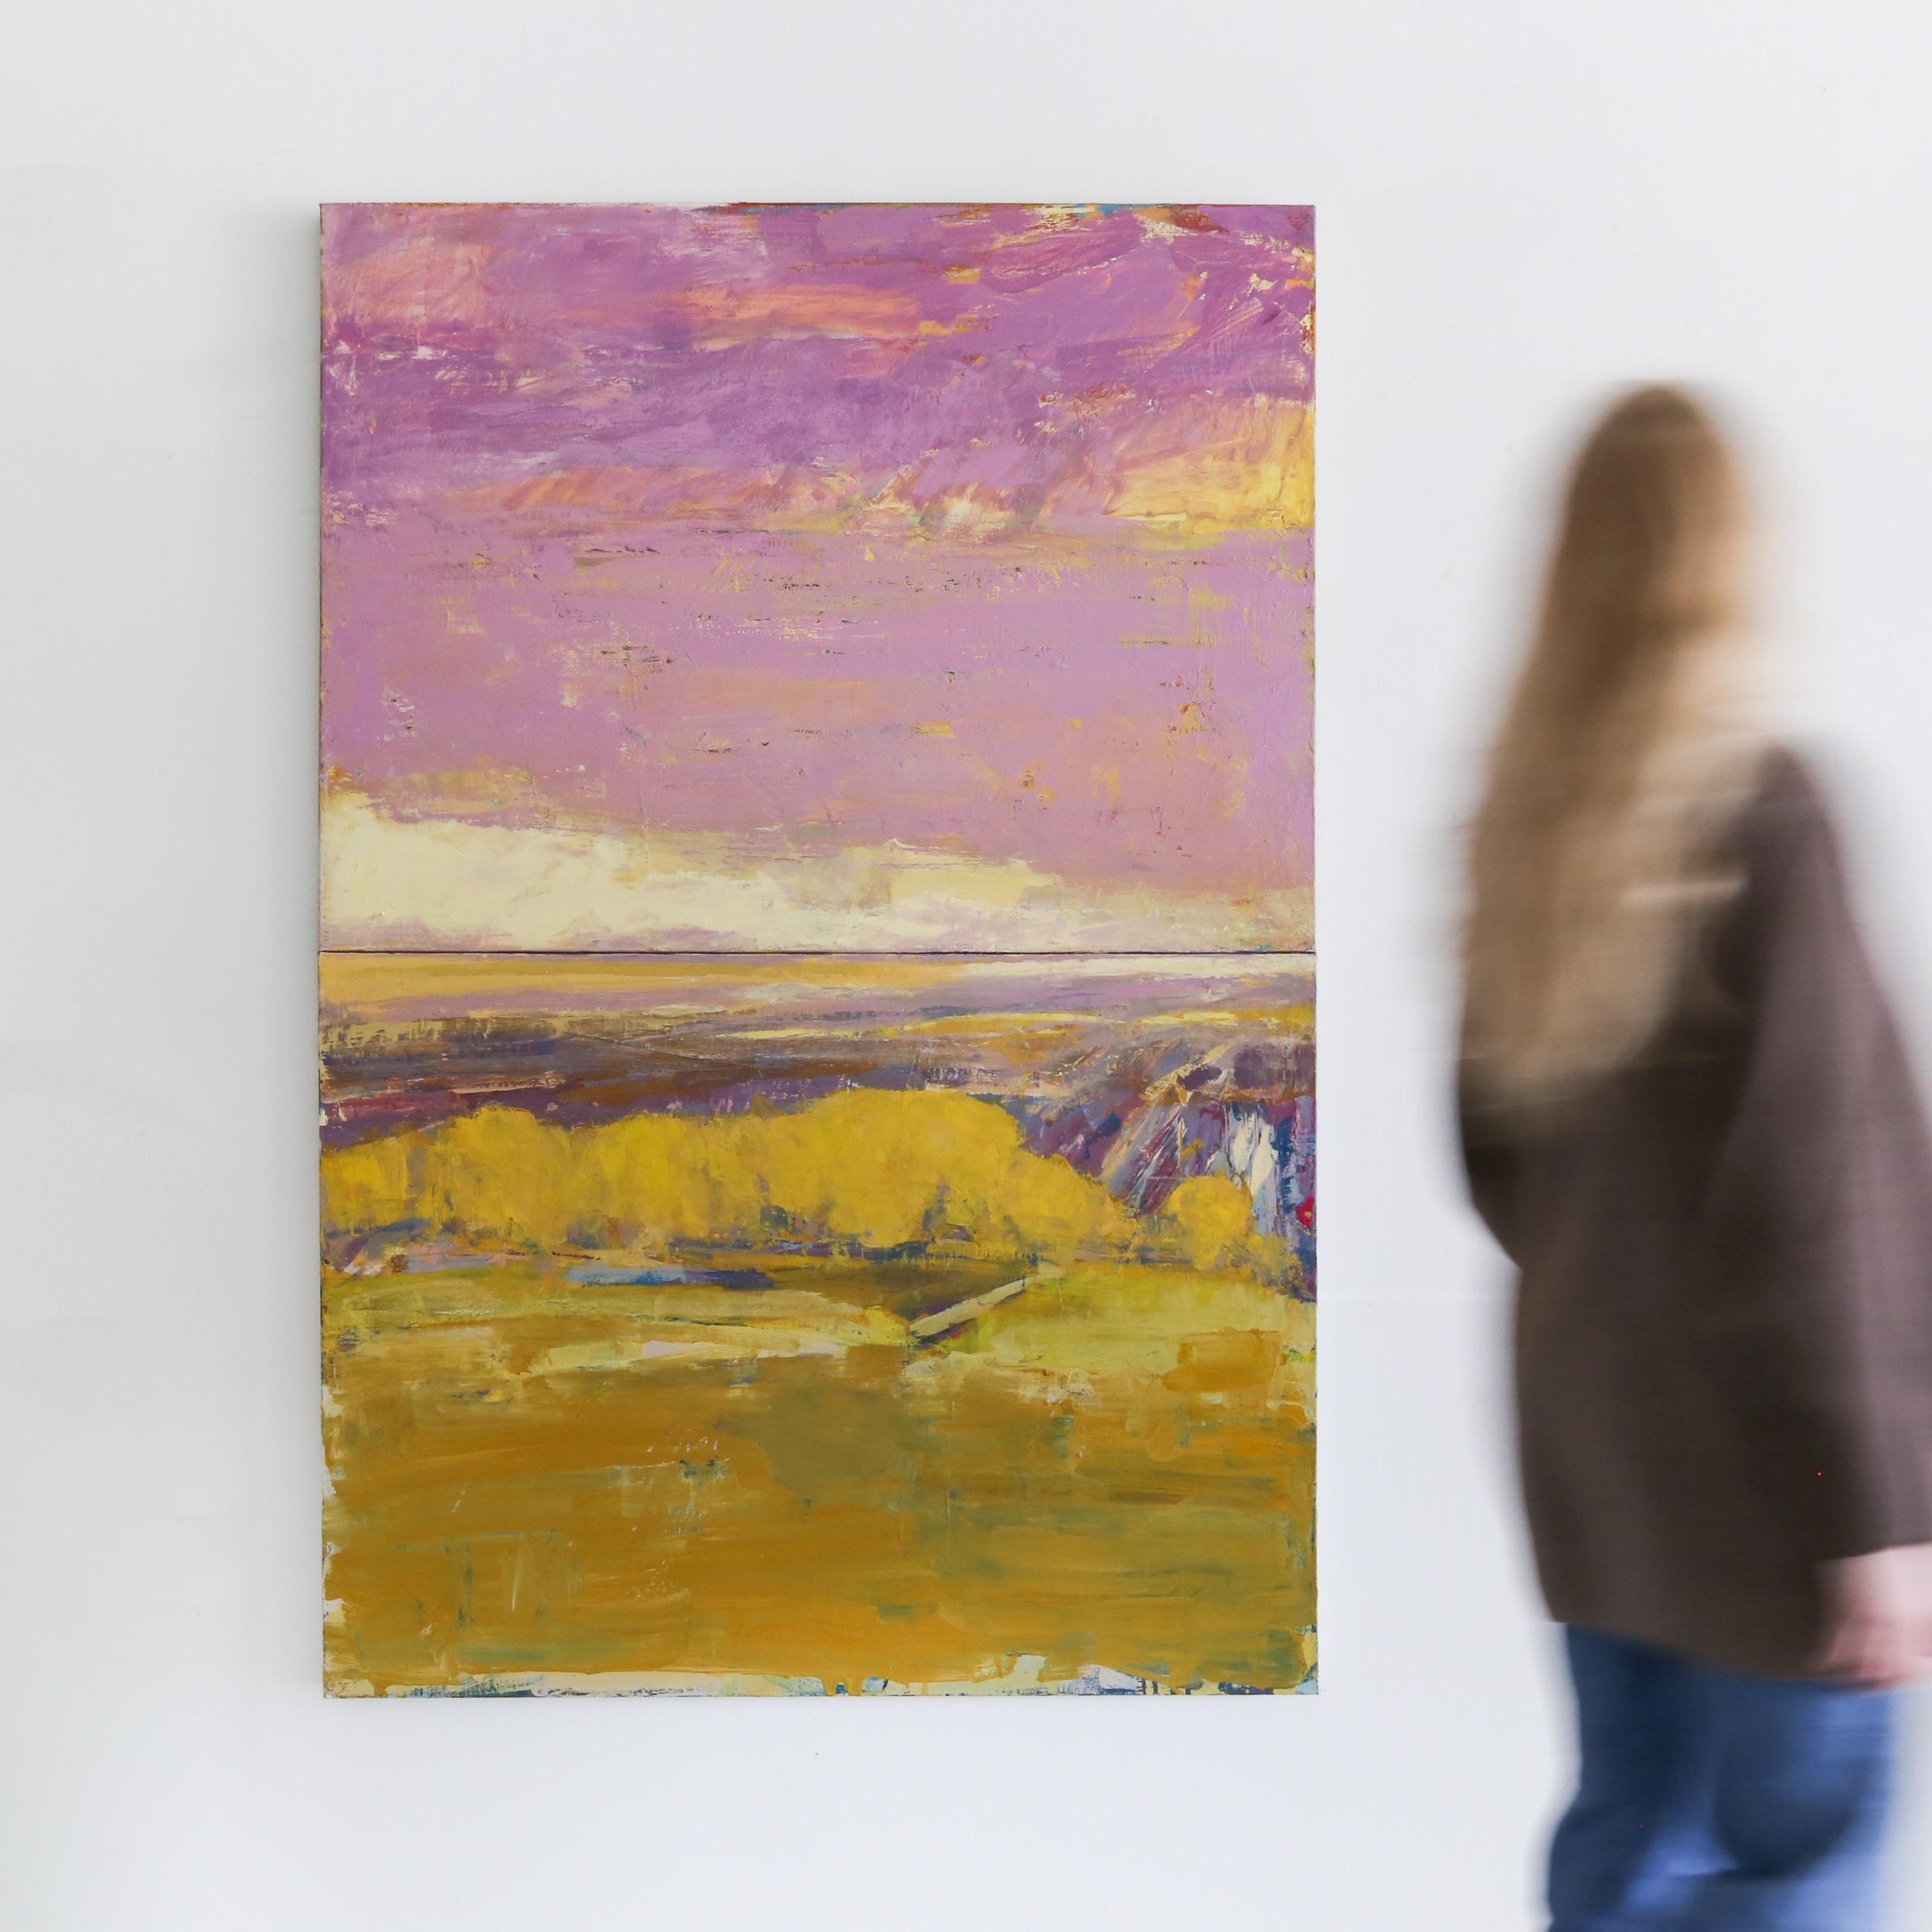 Hilltop and Lavender  Sky - Abstract Expressionist Painting by Patrick Adams